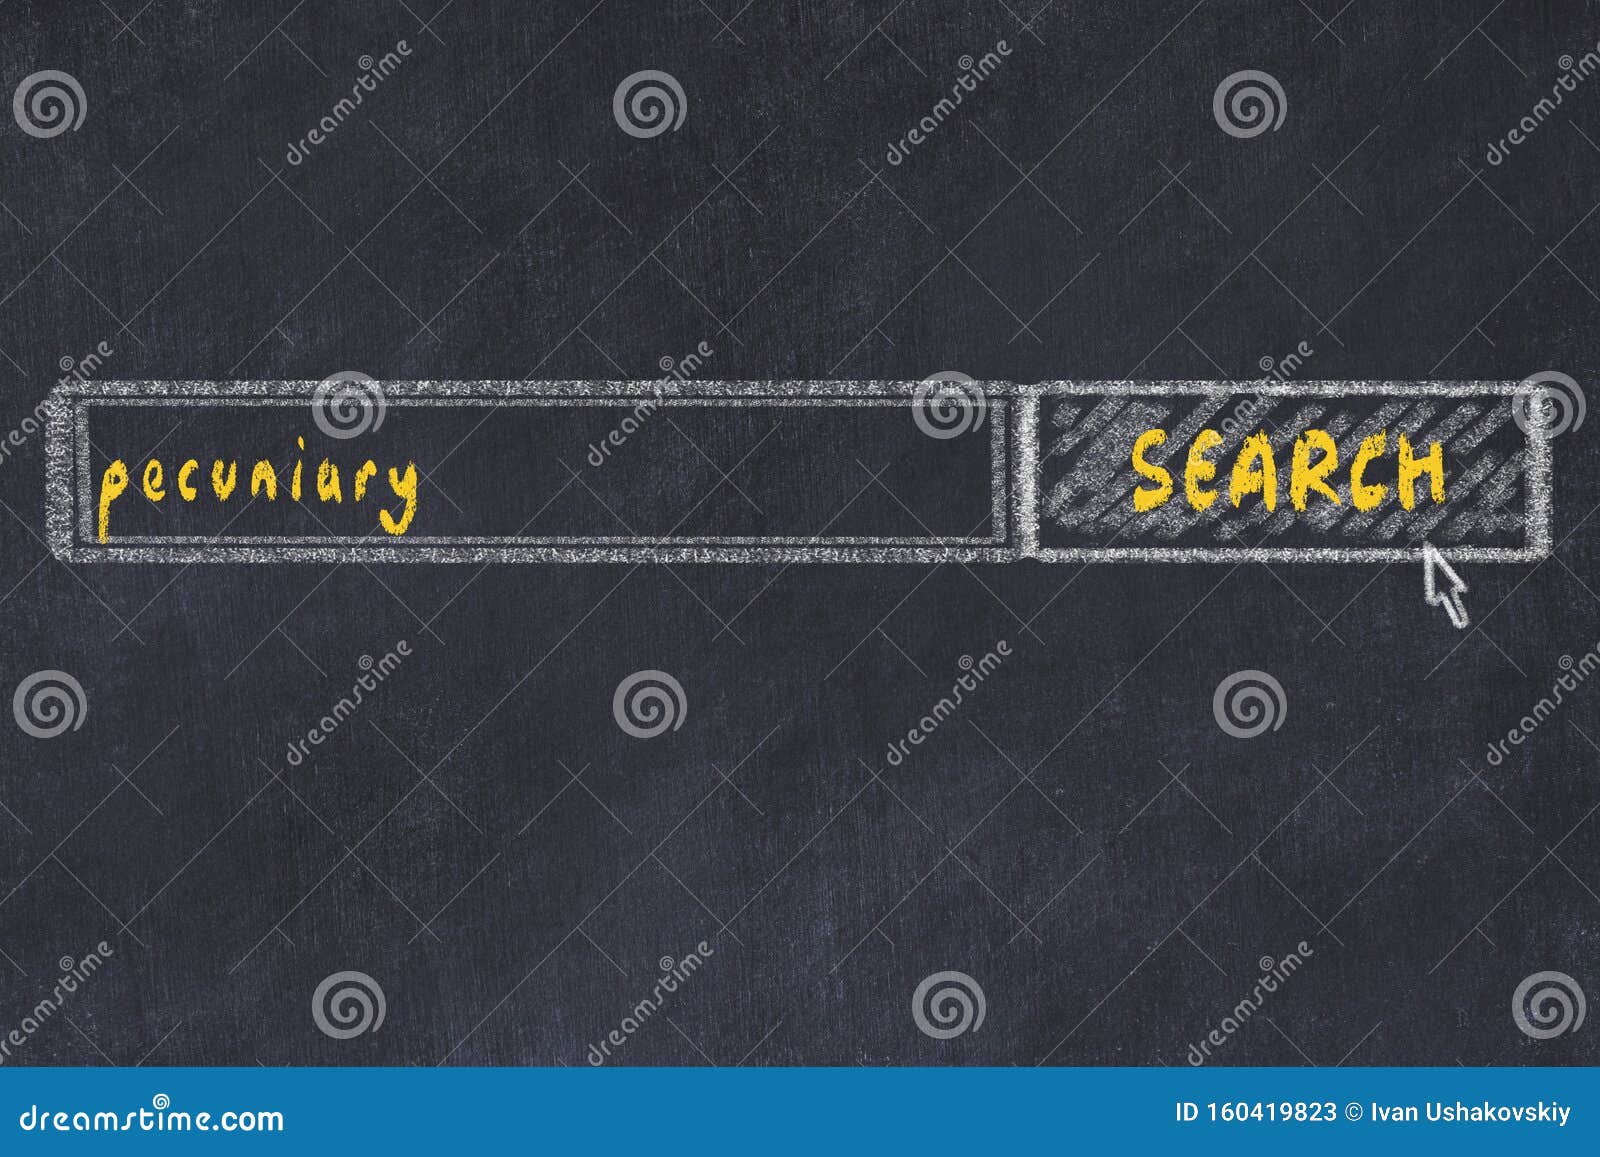 chalkboard drawing of search browser window and inscription pecuniary